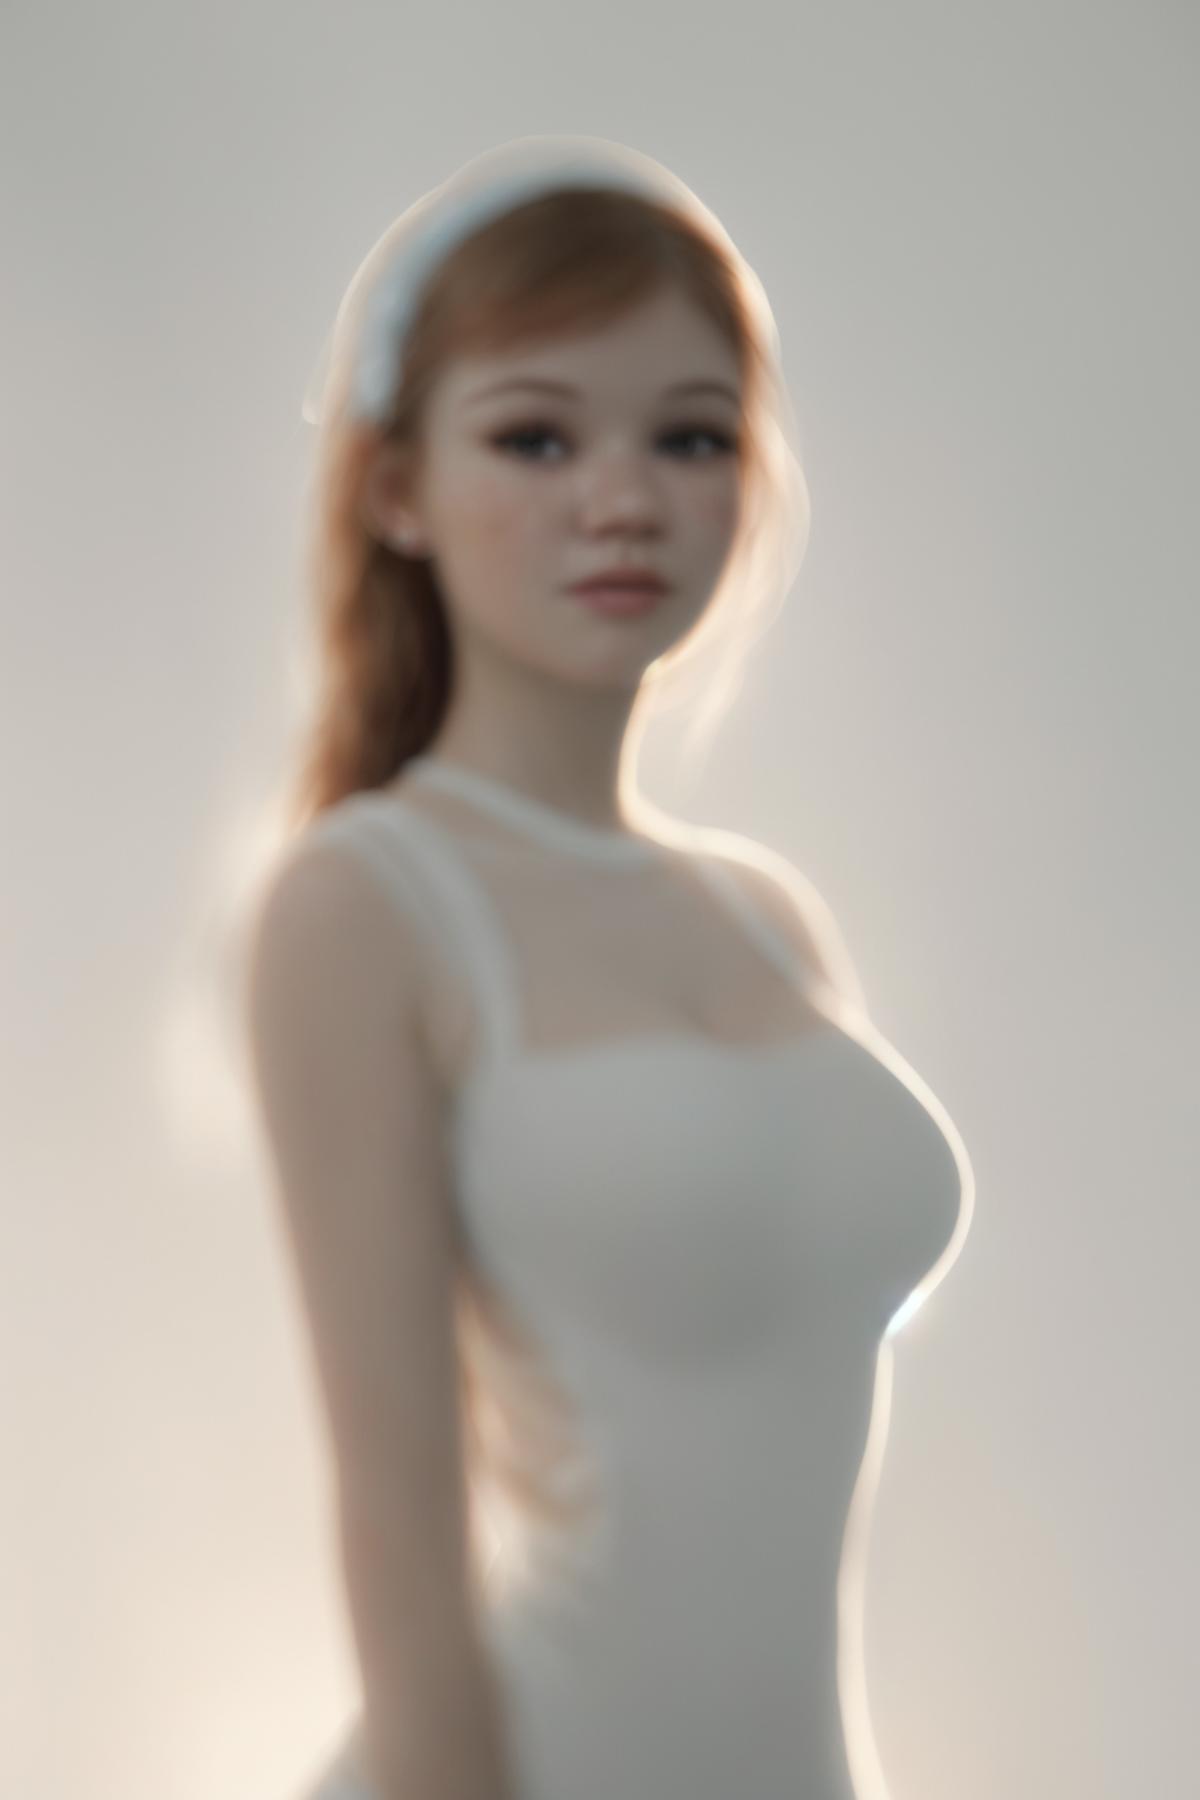 AI model image by Denche354